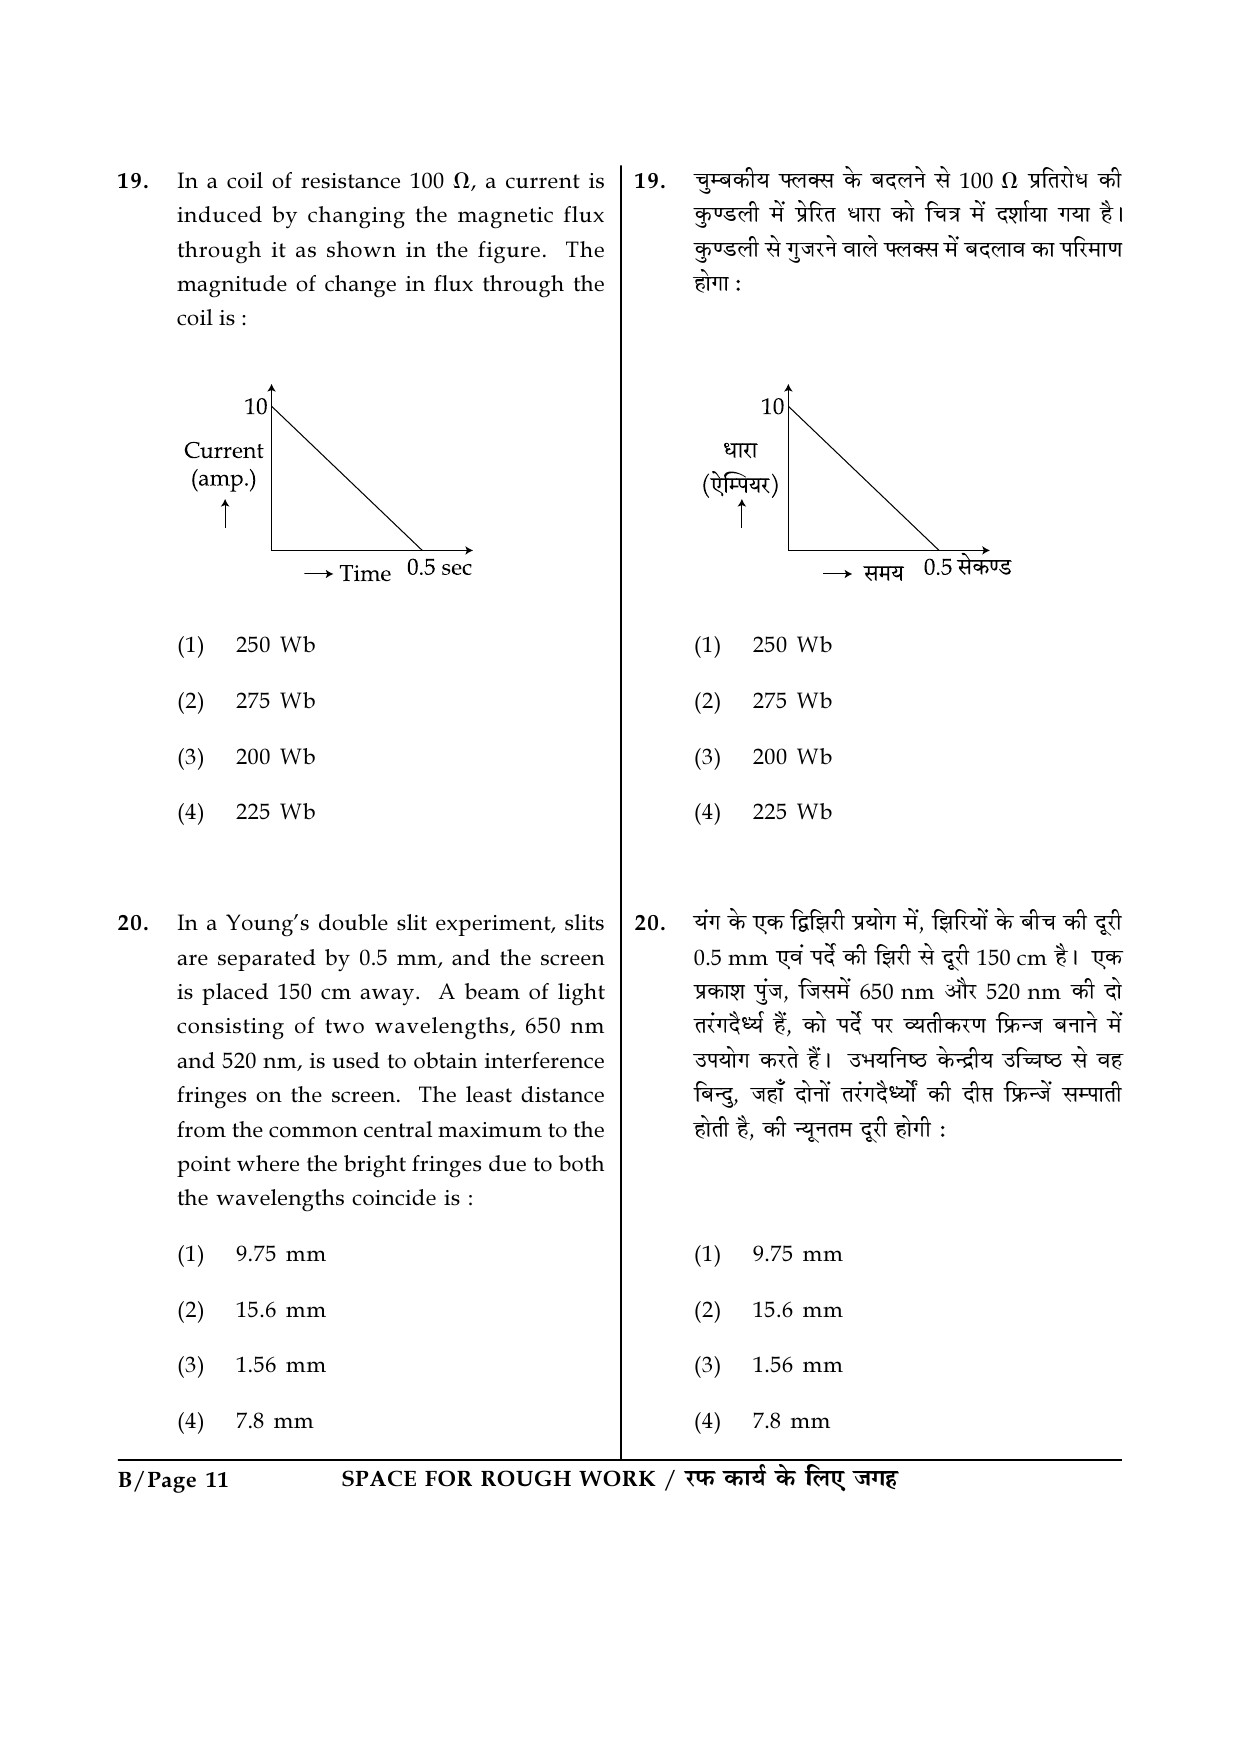 JEE Main Exam Question Paper 2017 Booklet B 11